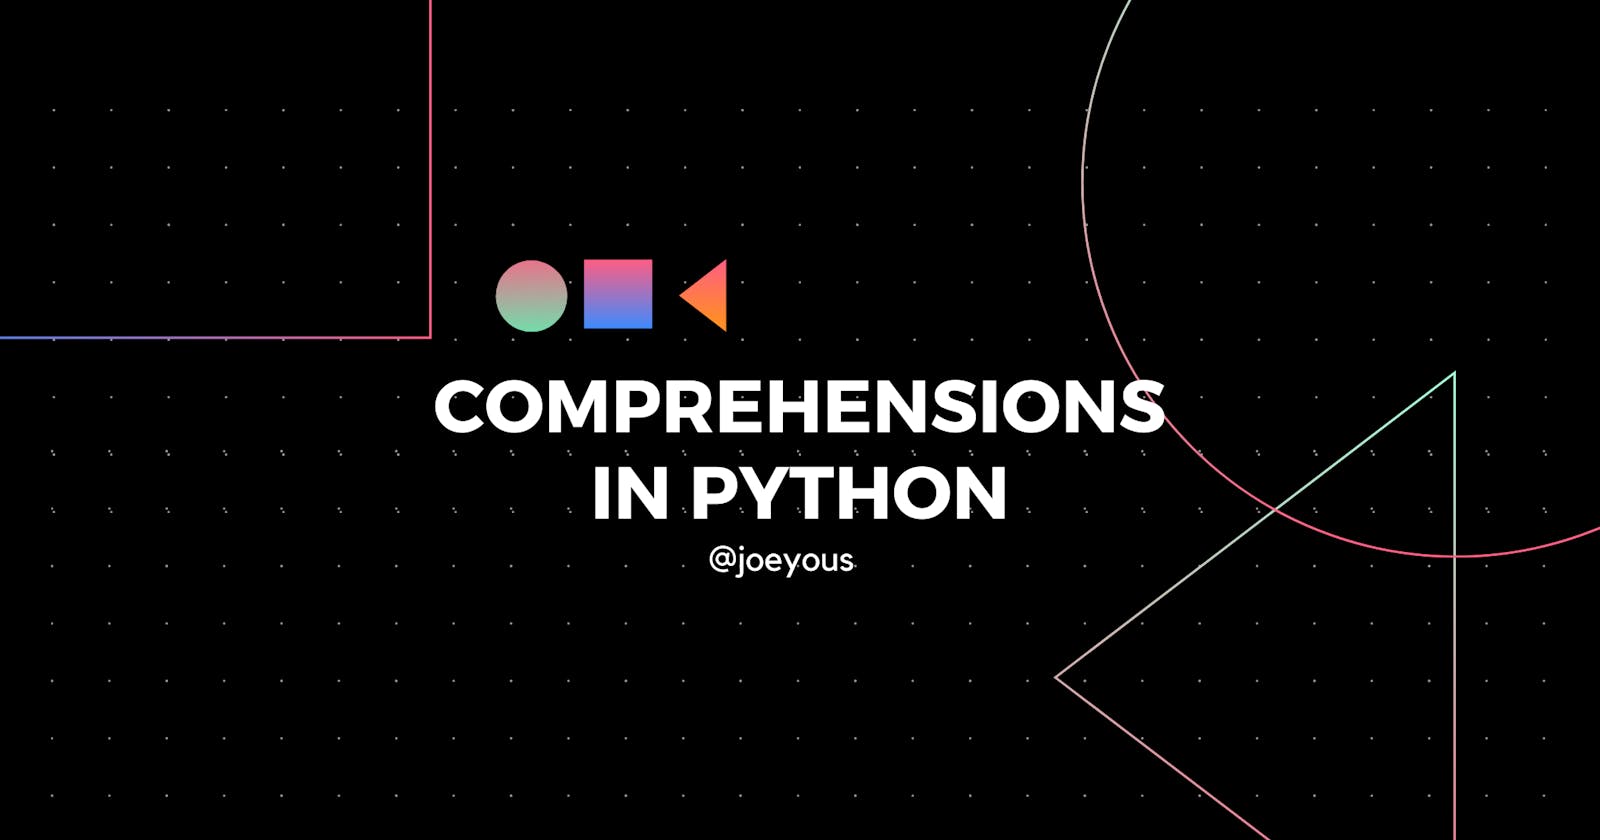 Comprehensions in Python